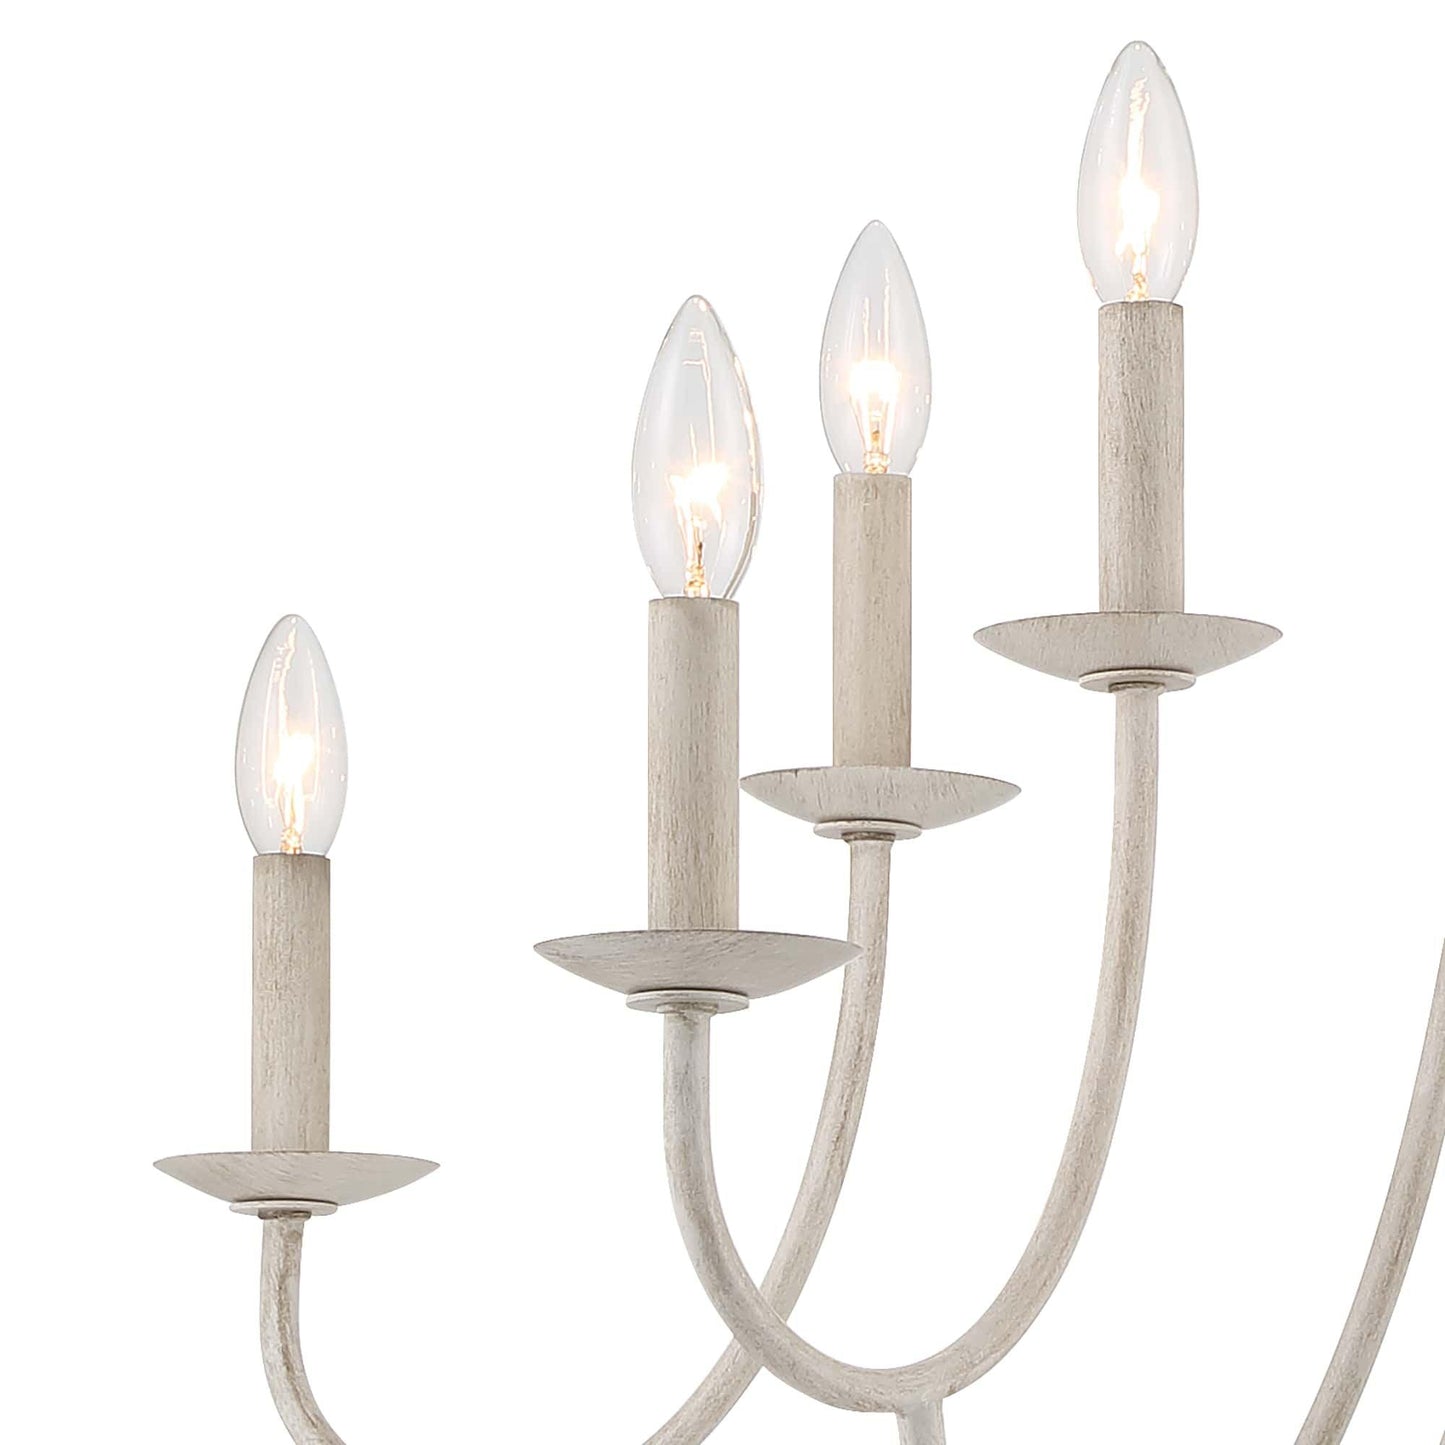 10 light candle style classic chandelier (10) by ACROMA